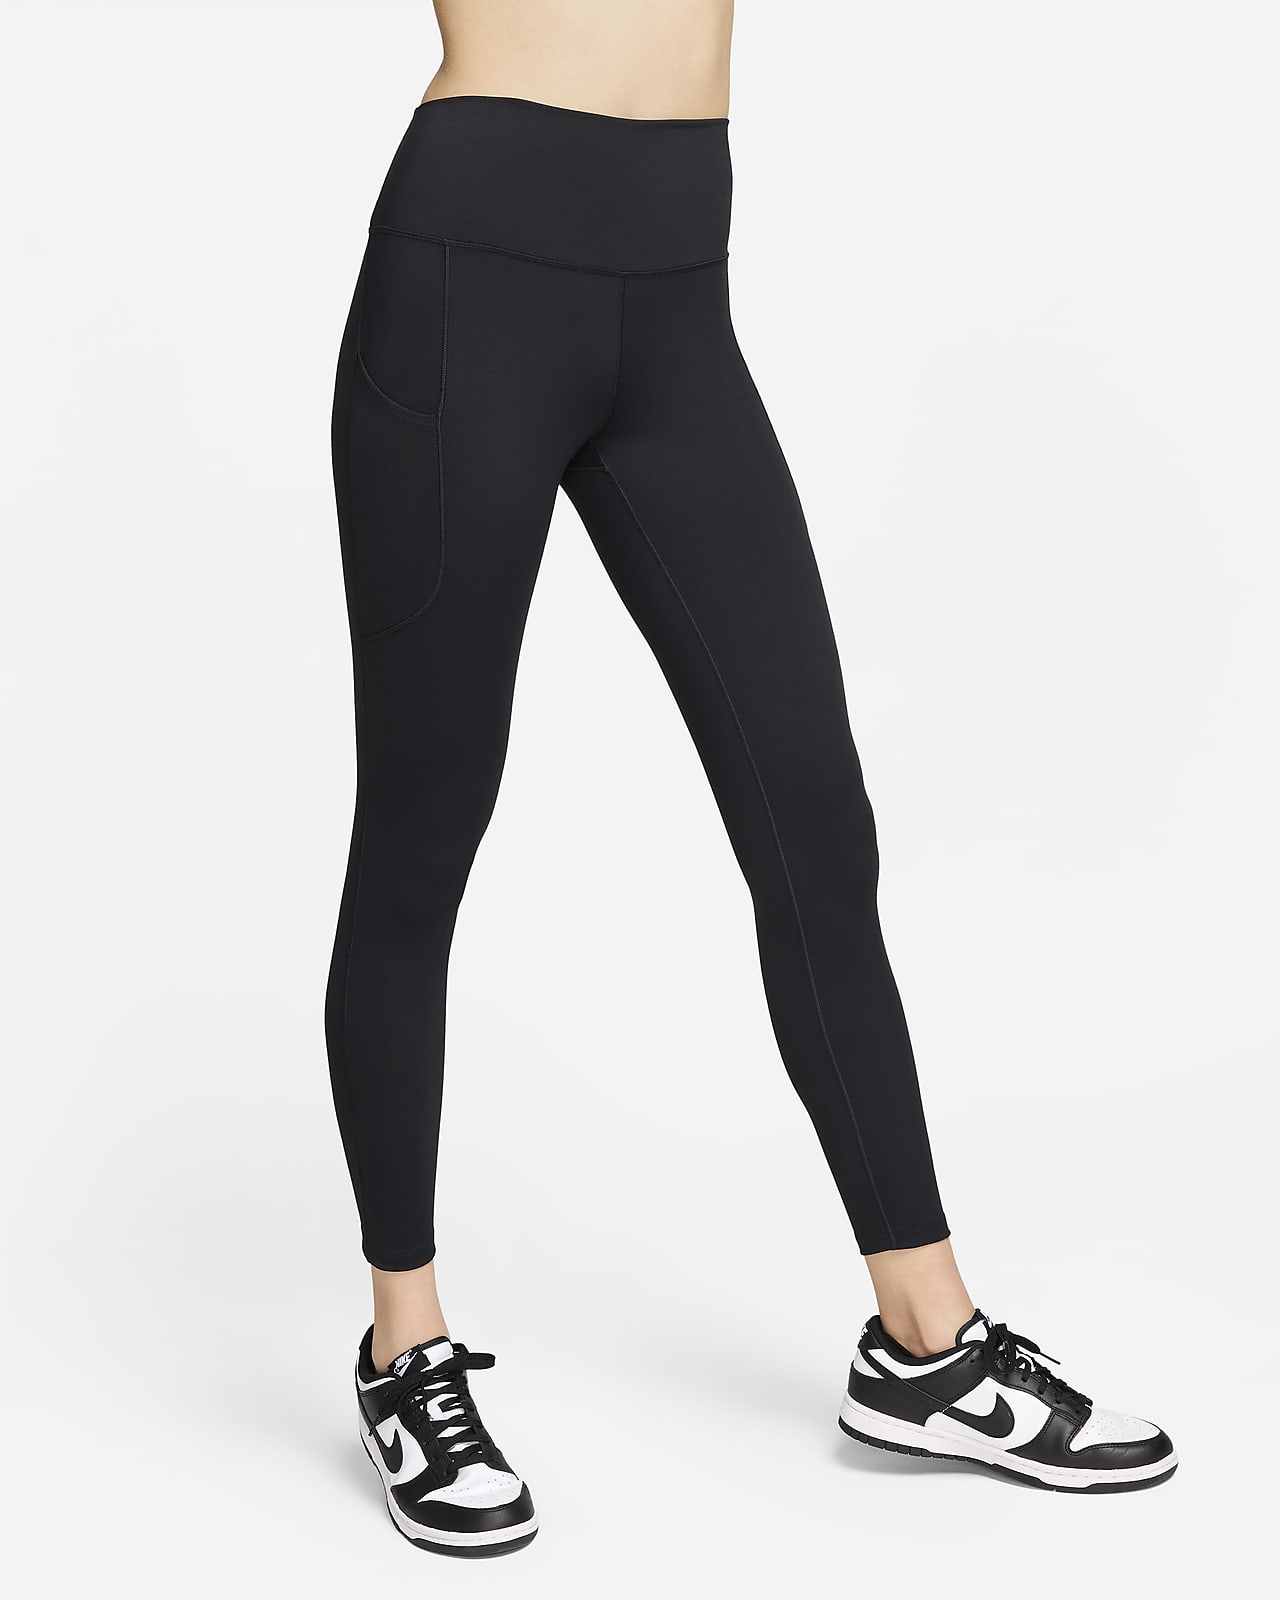 Nike One Women's High-Waisted 7/8 Leggings with Pockets